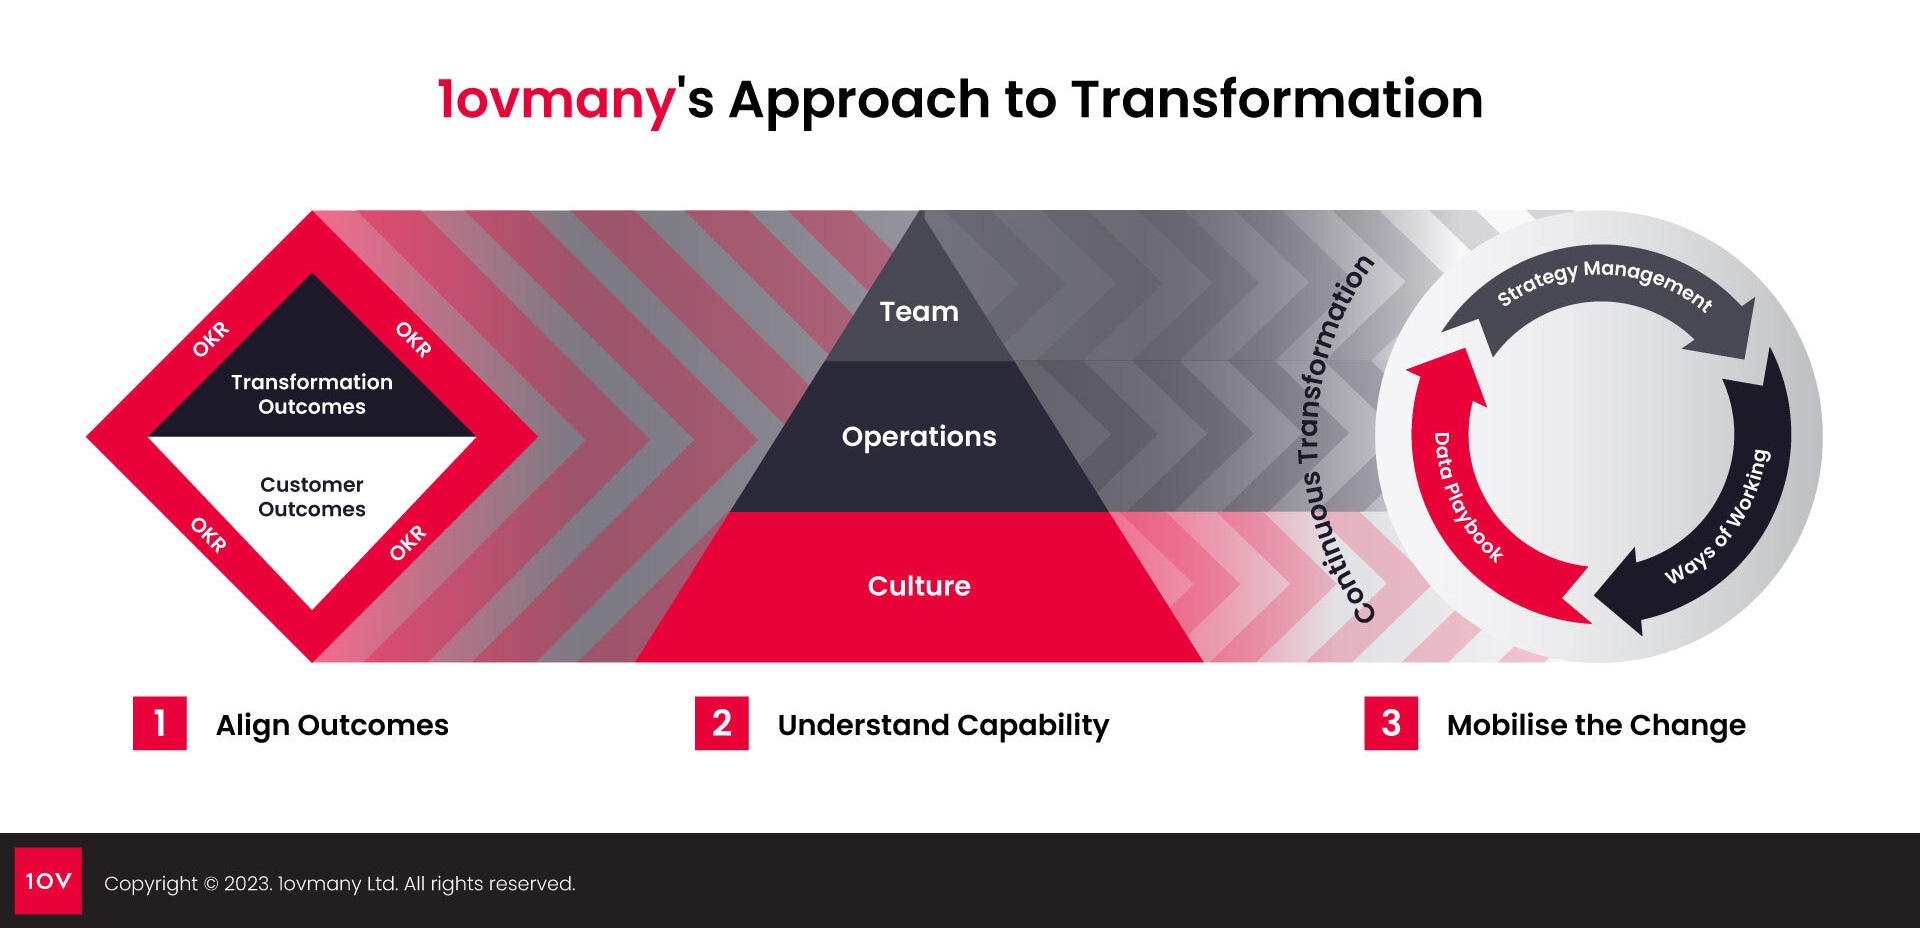 1ovmany's approach to Business Transformation Consulting